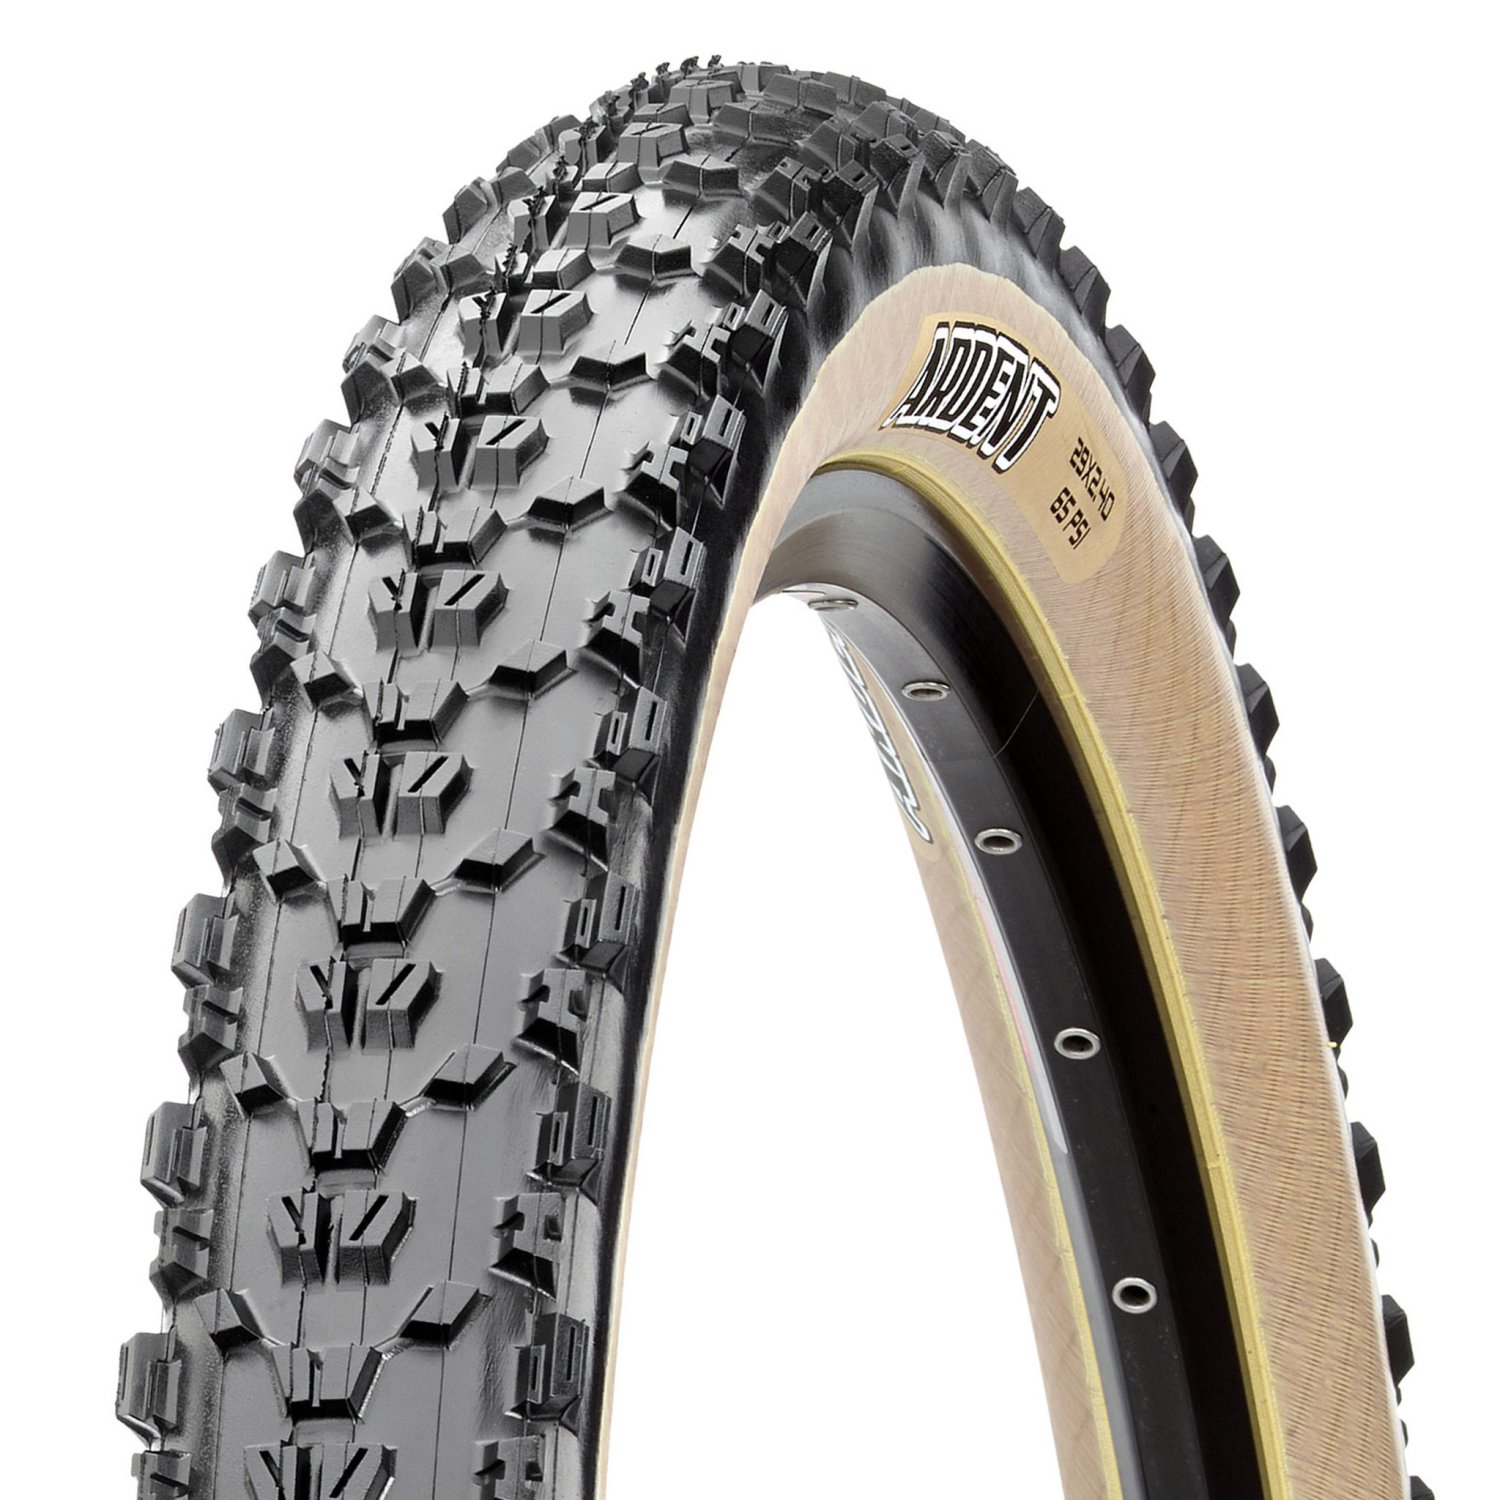 Покрышка велосипедная Maxxis Ardent-Tanwall, 29x2.4, 60 TPI wire 60a, TB96789100 покрышка maxxis tread lite exo tr 29x2 1 120 tpi мтб tb96659100